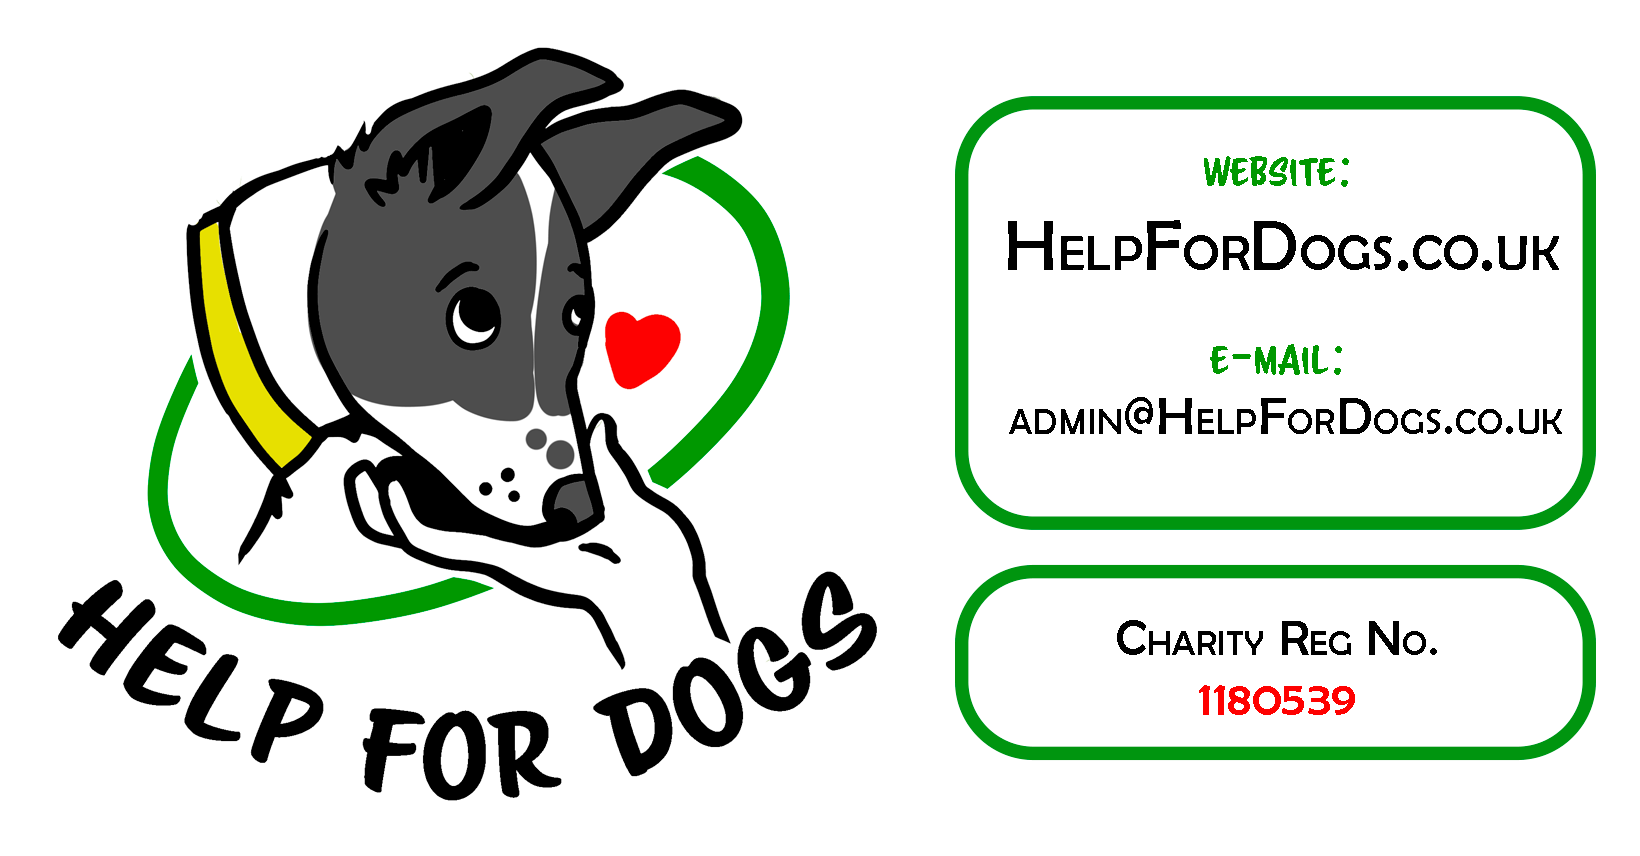 Help For Dogs contact details